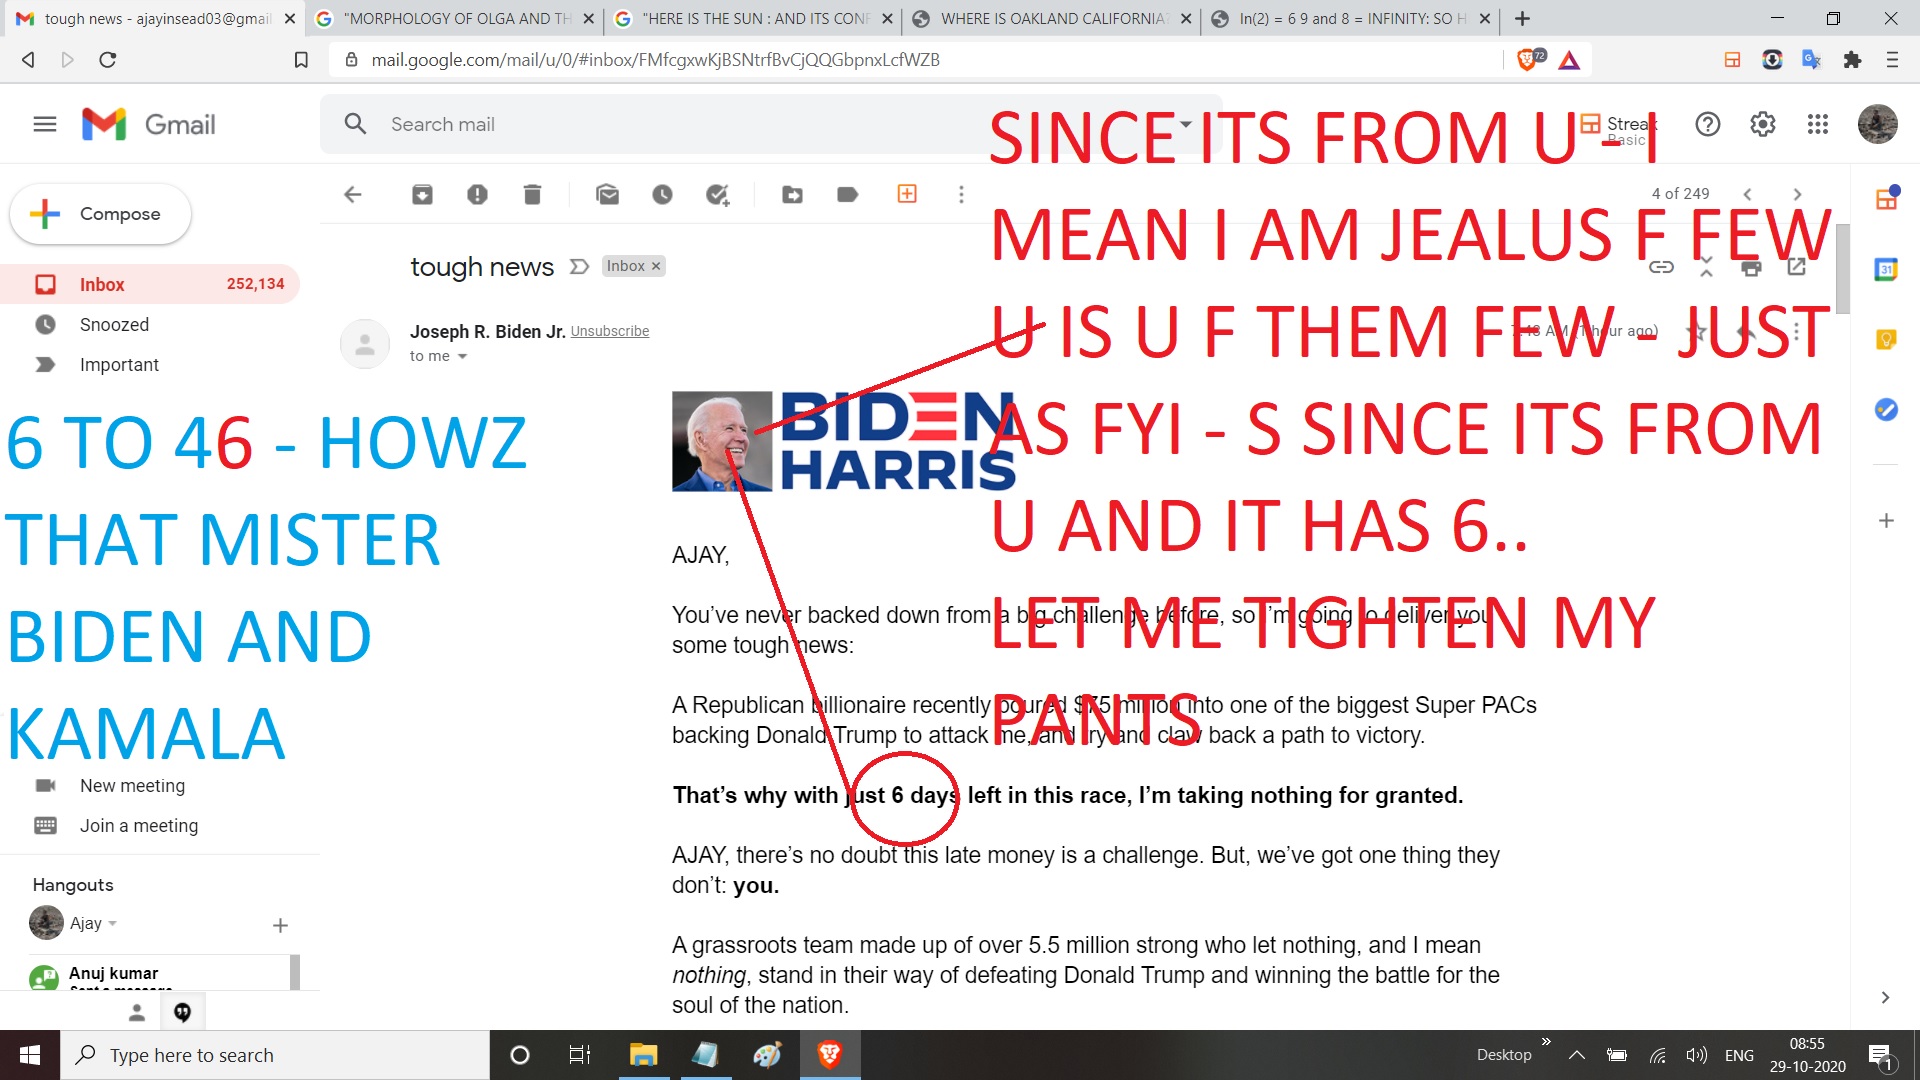 6 TO 46 - HWZ THAT MISTER BIDEN AND KAMALA